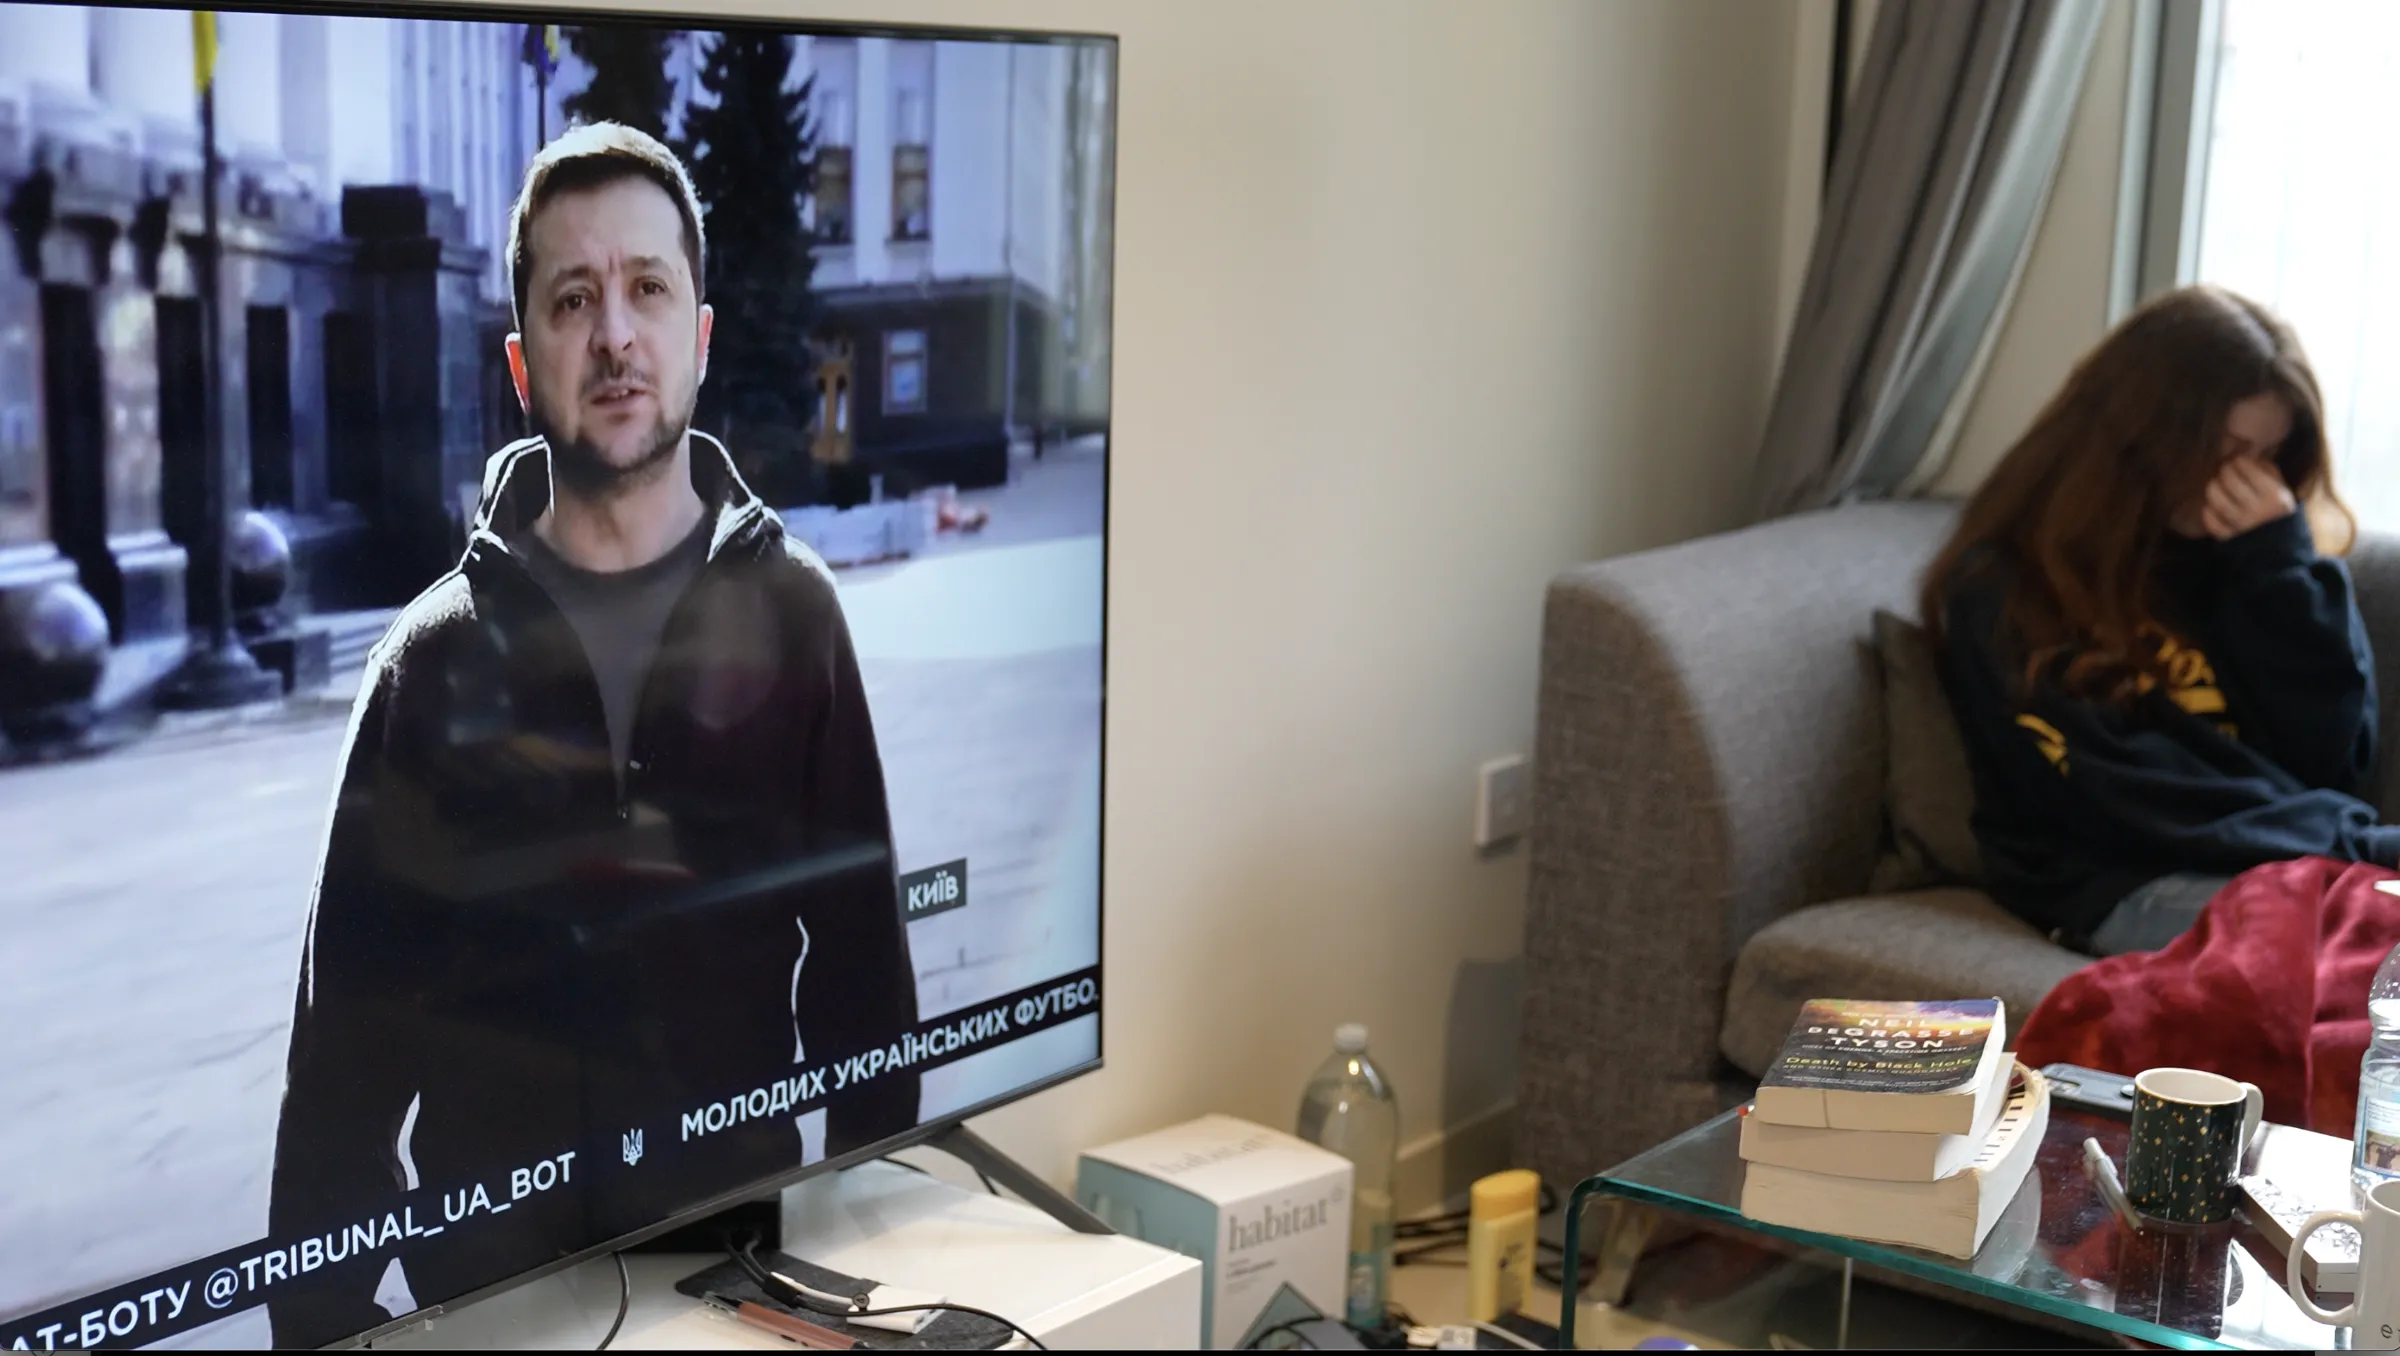 Still from Context video 'Are crypto donations having an impact in Ukraine?'